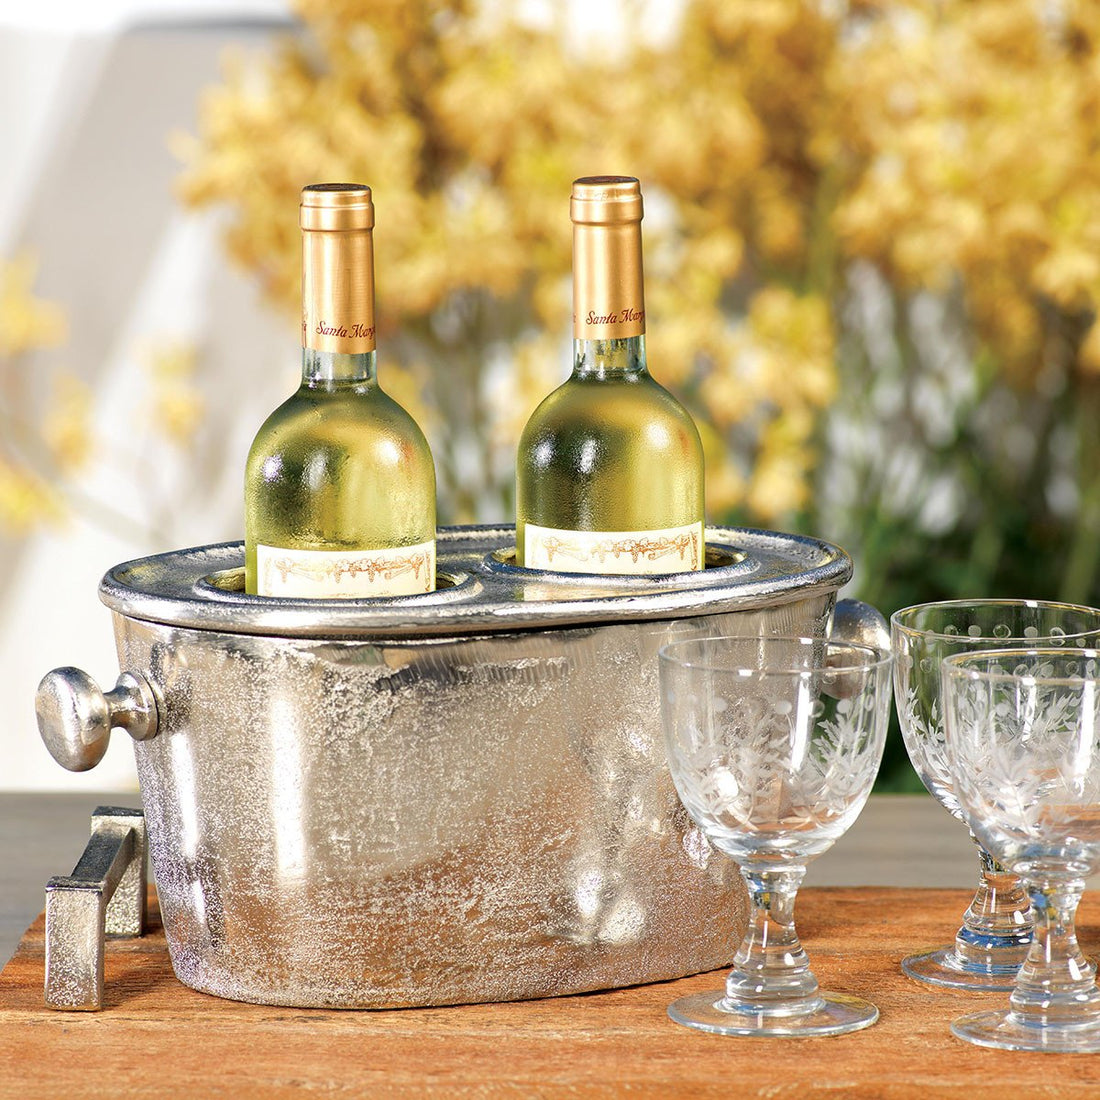 Two bottles of white wine in a Zodax Two Bottle Aluminum Wine Holder with stemware on a wooden table.